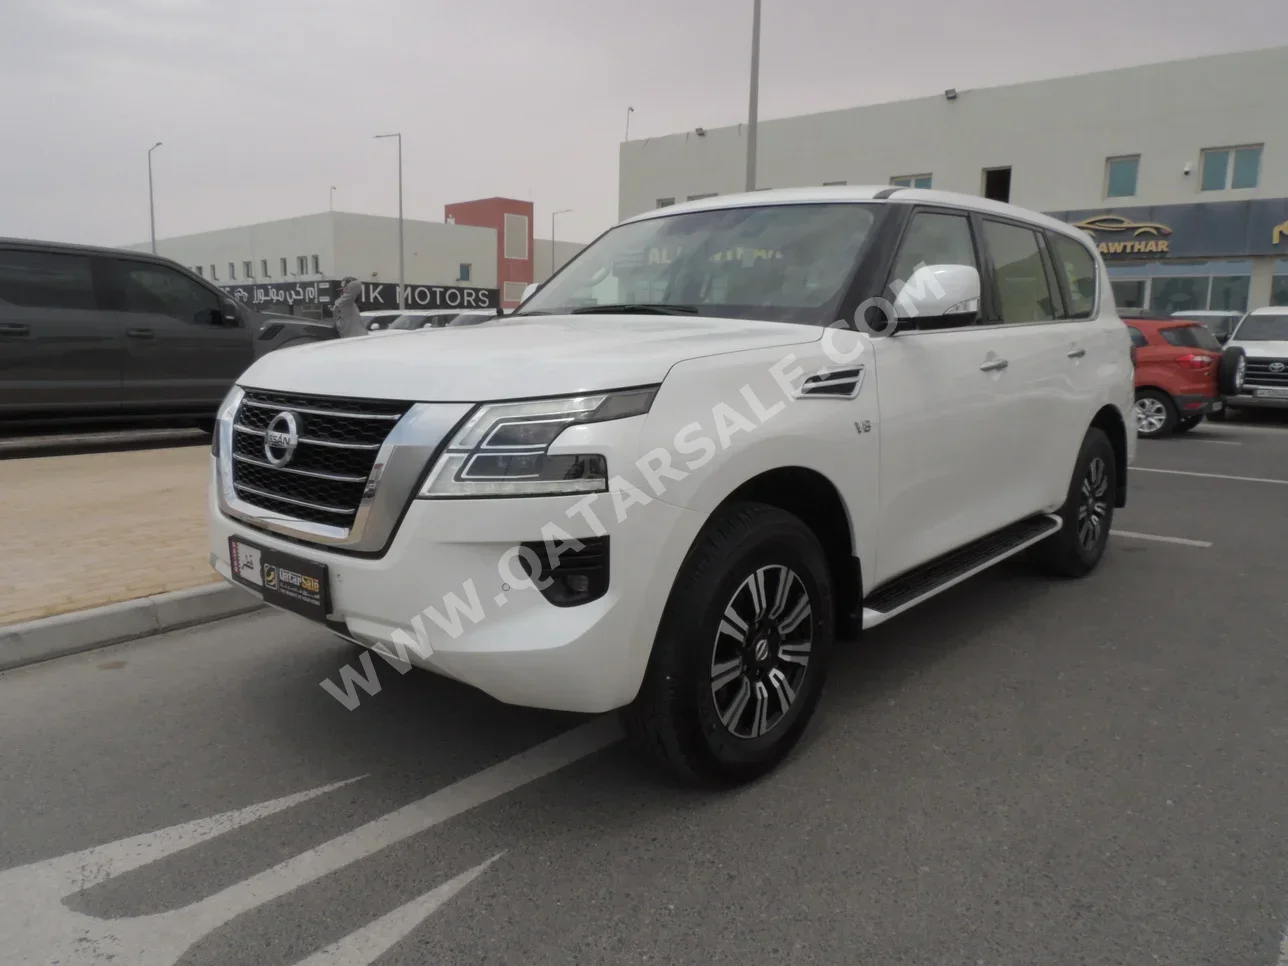 Nissan  Patrol  LE  2020  Automatic  41,000 Km  8 Cylinder  Four Wheel Drive (4WD)  SUV  White